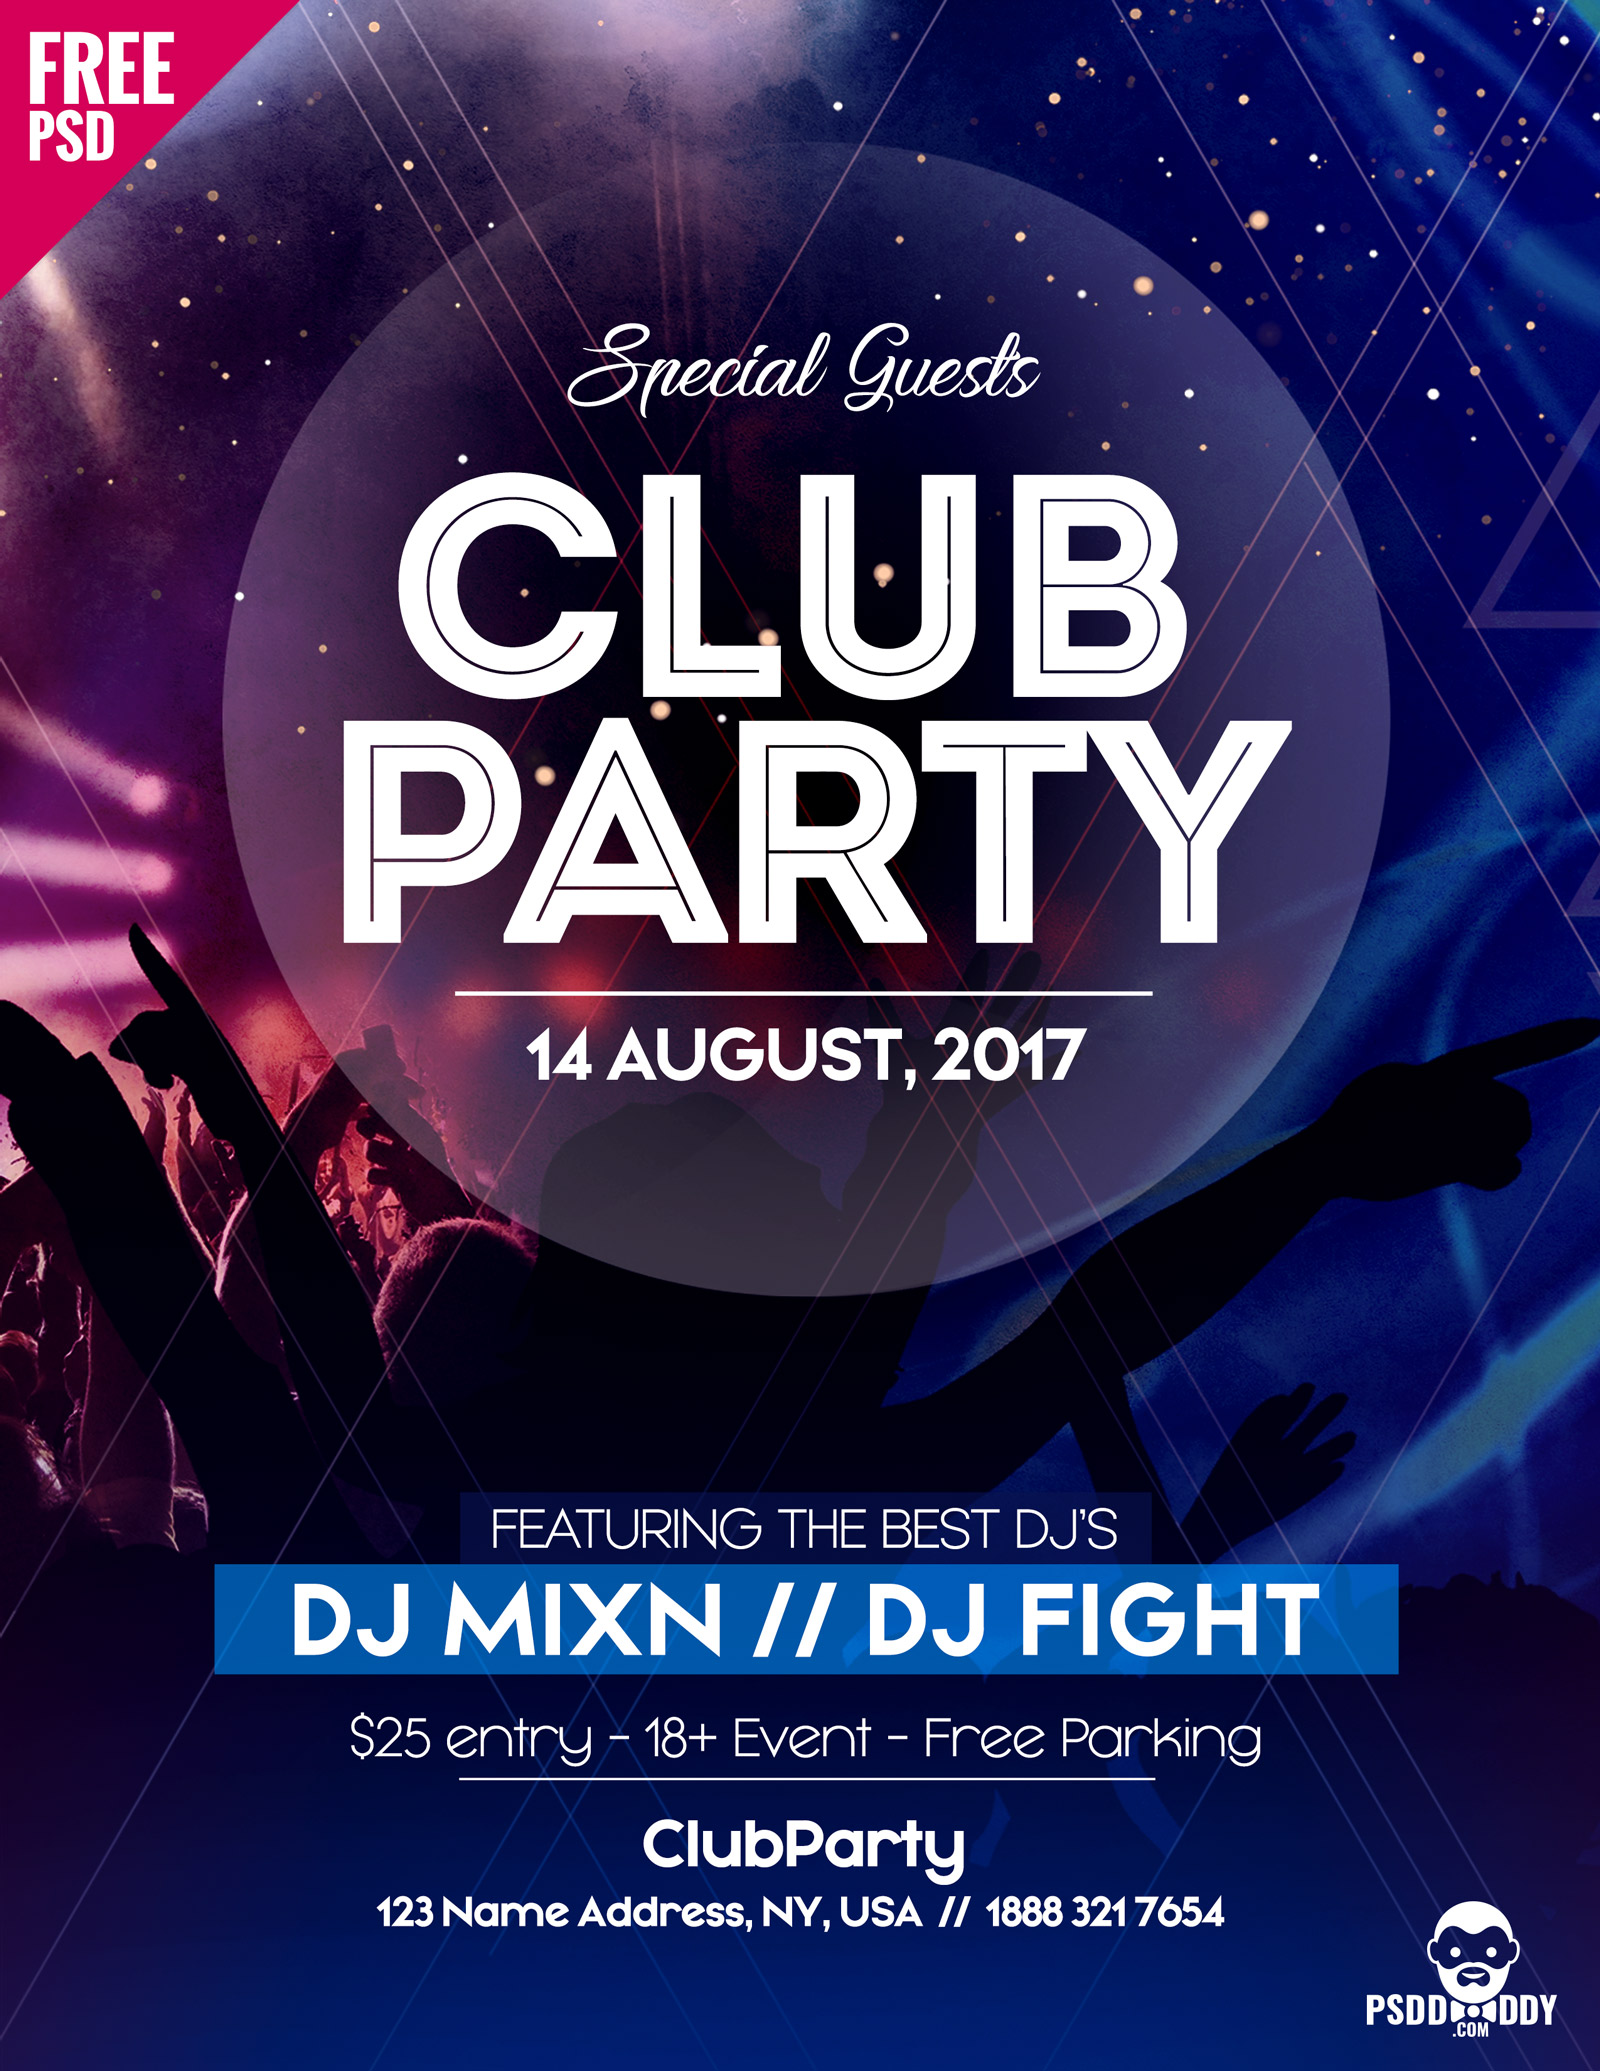 Download Free Psd Flyer For Club Party Psddaddy Com